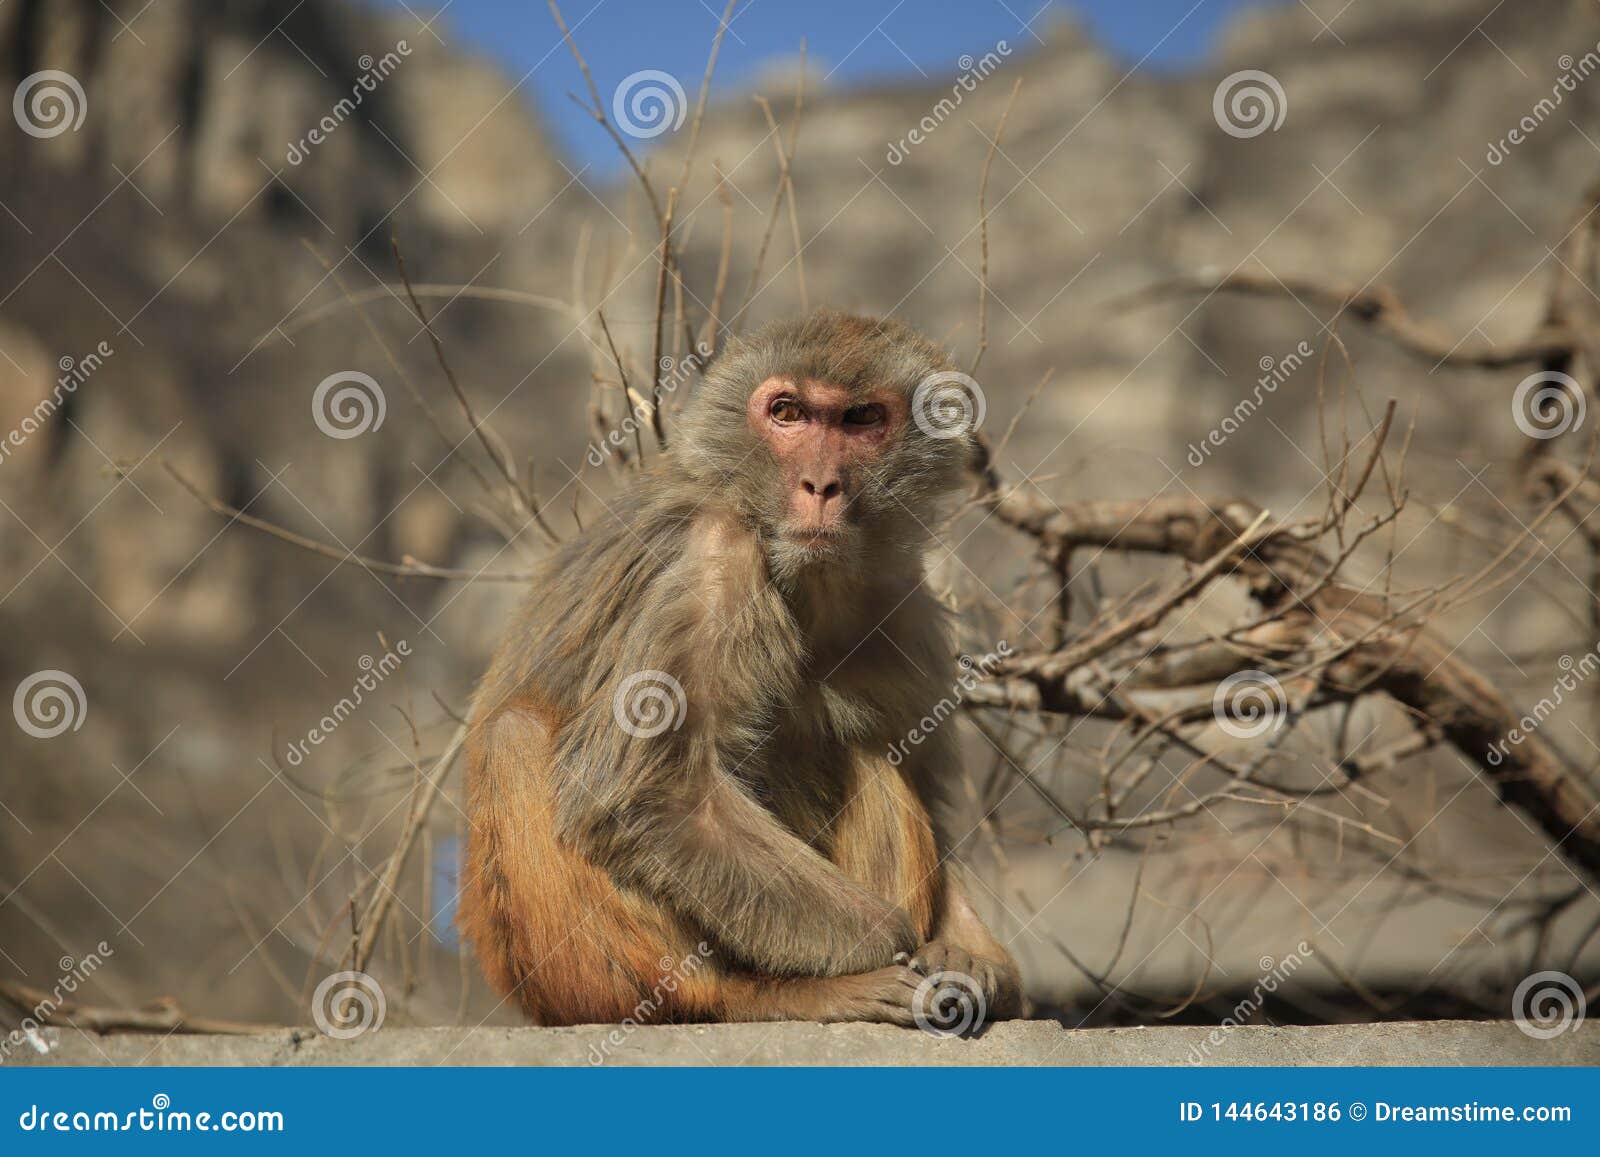 Download Cute angry Monkey stock photo. Image of others, looks ...